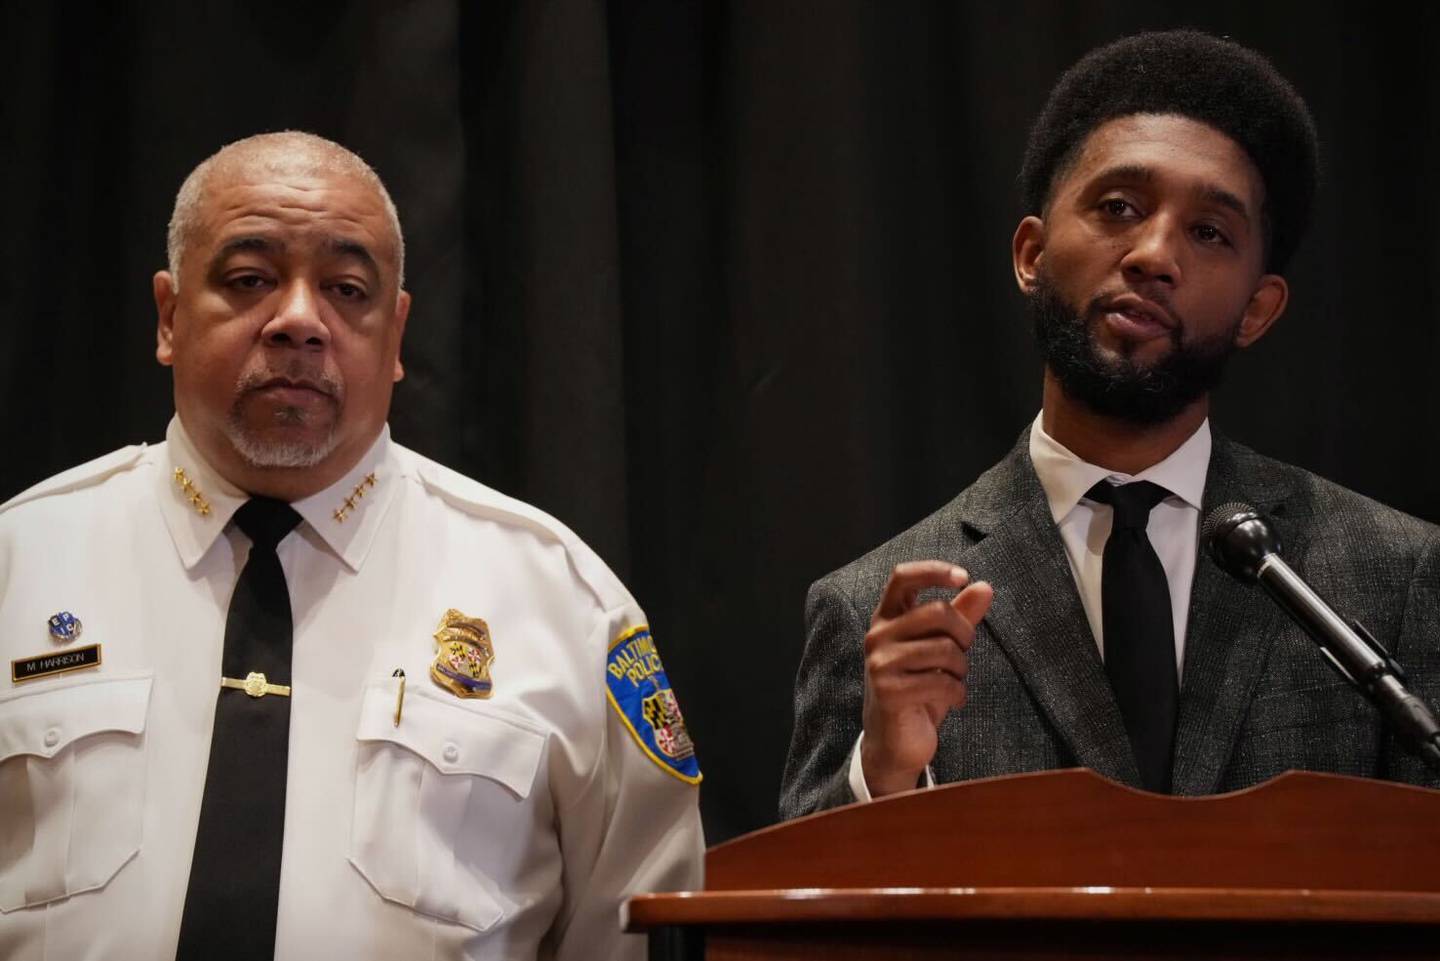 Baltimore Mayor Brandon Scott, right, speaks during a press conference at Baltimore City Hall on Wednesday, Dec. 21. To his left is Police Commissioner Michael Harrison.